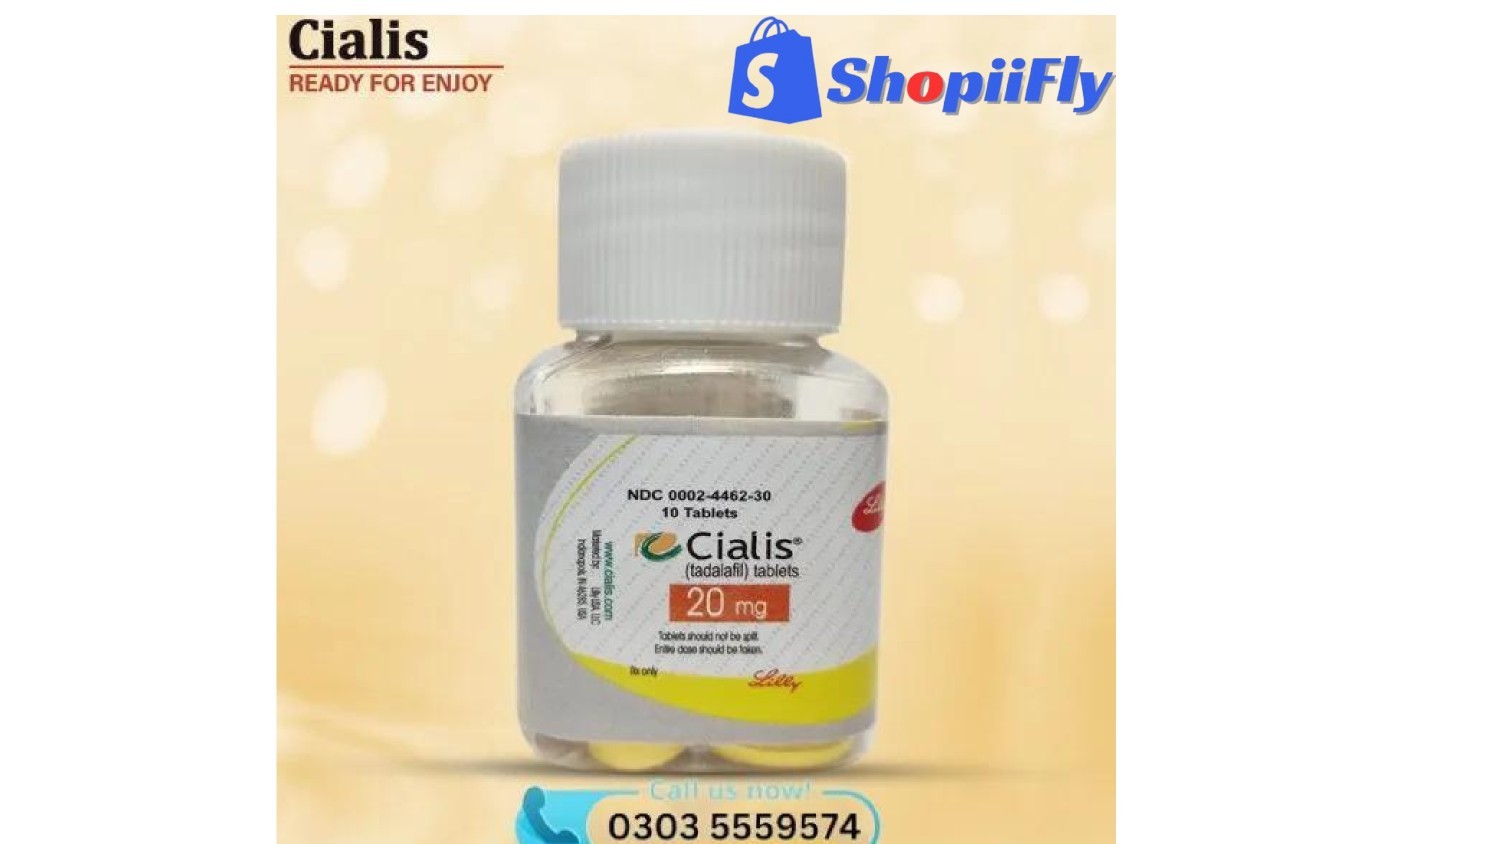 Everlong 60mg Tablets price in Hyderabad &Cialis 20mg 10 Tablet price...